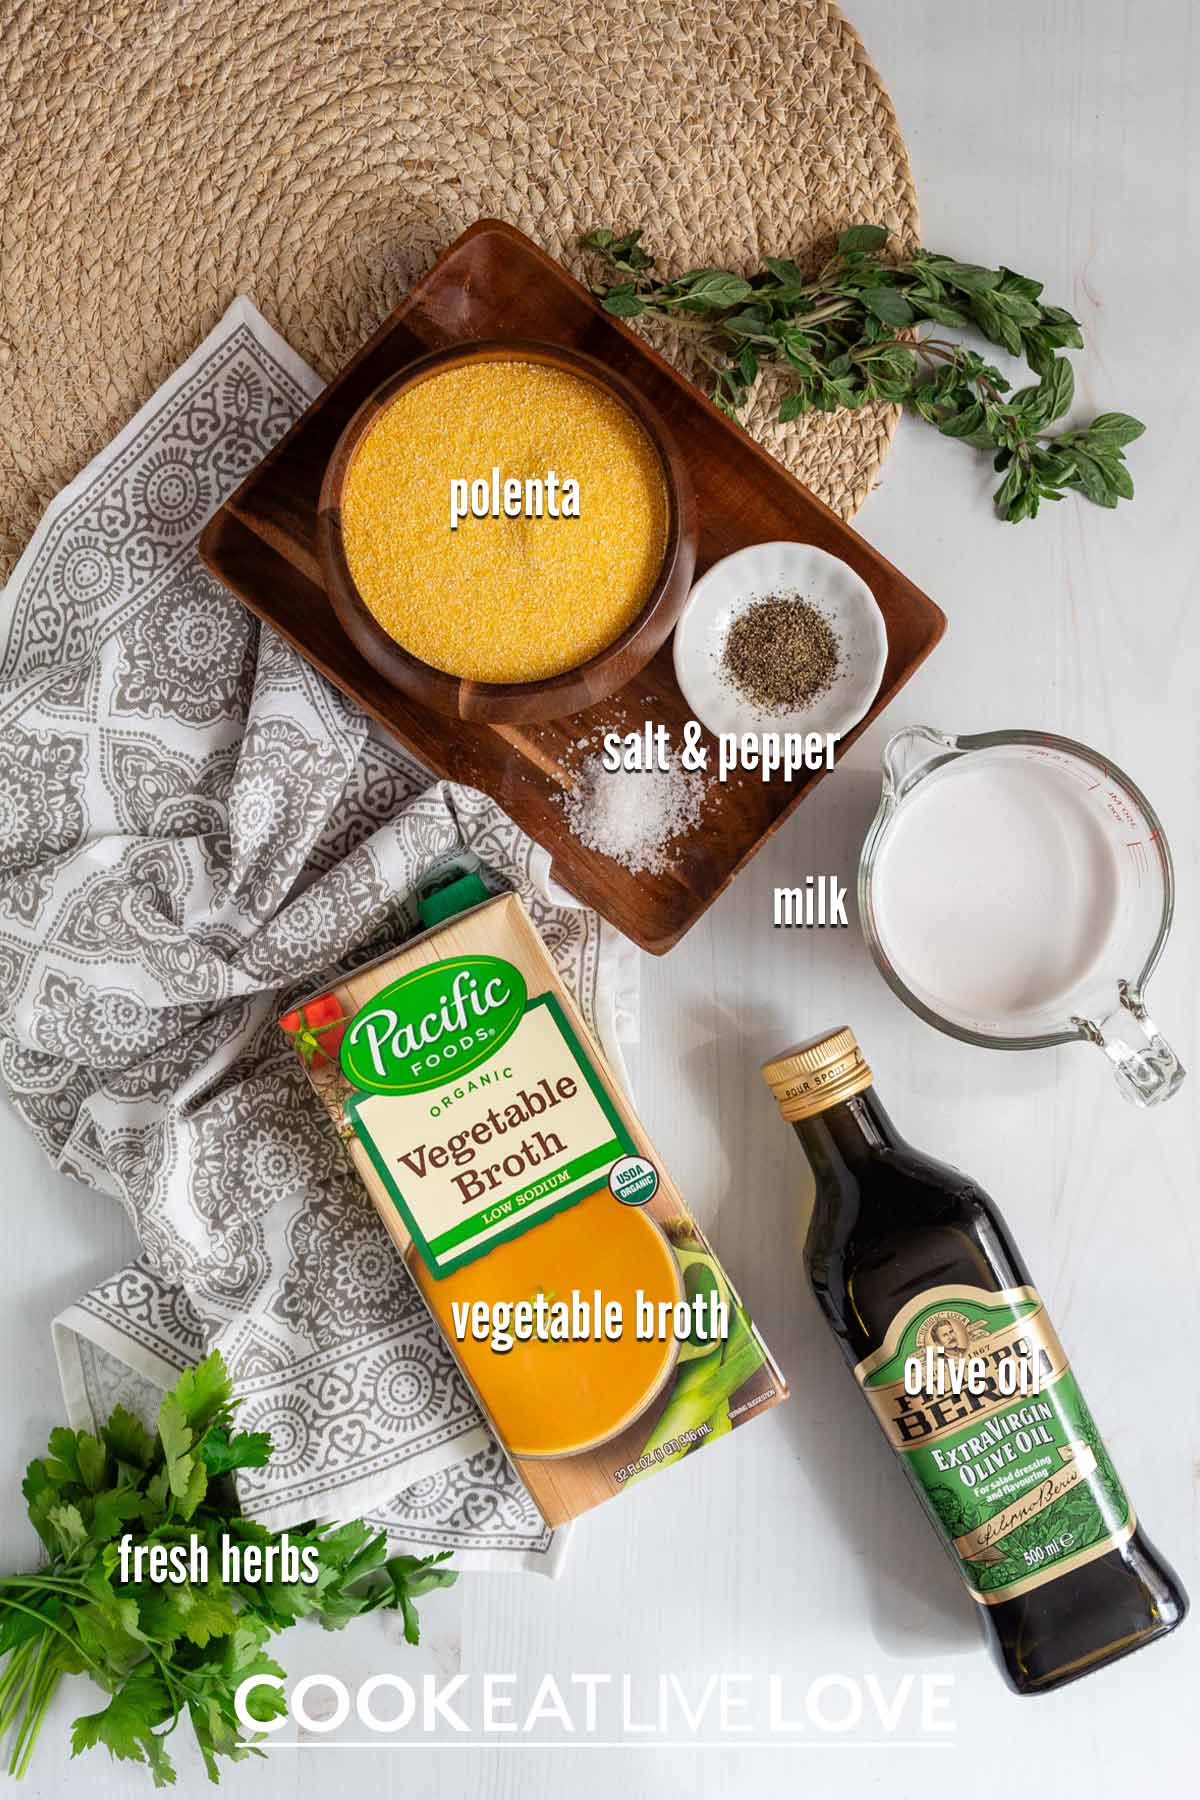 Ingredients to make creamy polenta in the slow cooker on the table.